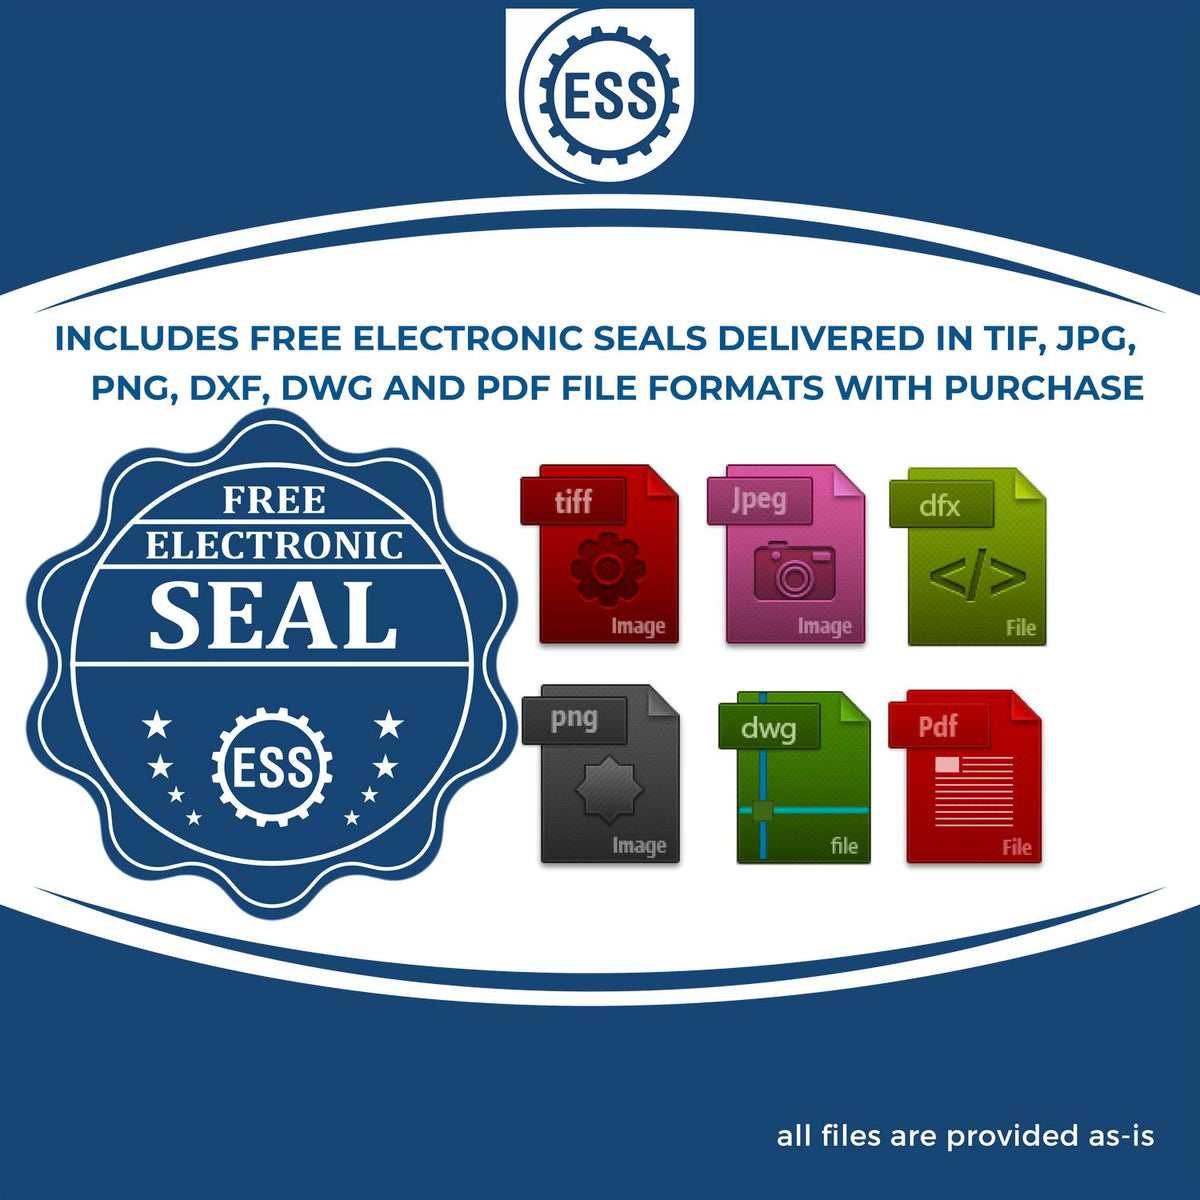 An infographic for the free electronic seal for the Long Reach Hawaii Land Surveyor Seal illustrating the different file type icons such as DXF, DWG, TIF, JPG and PNG.